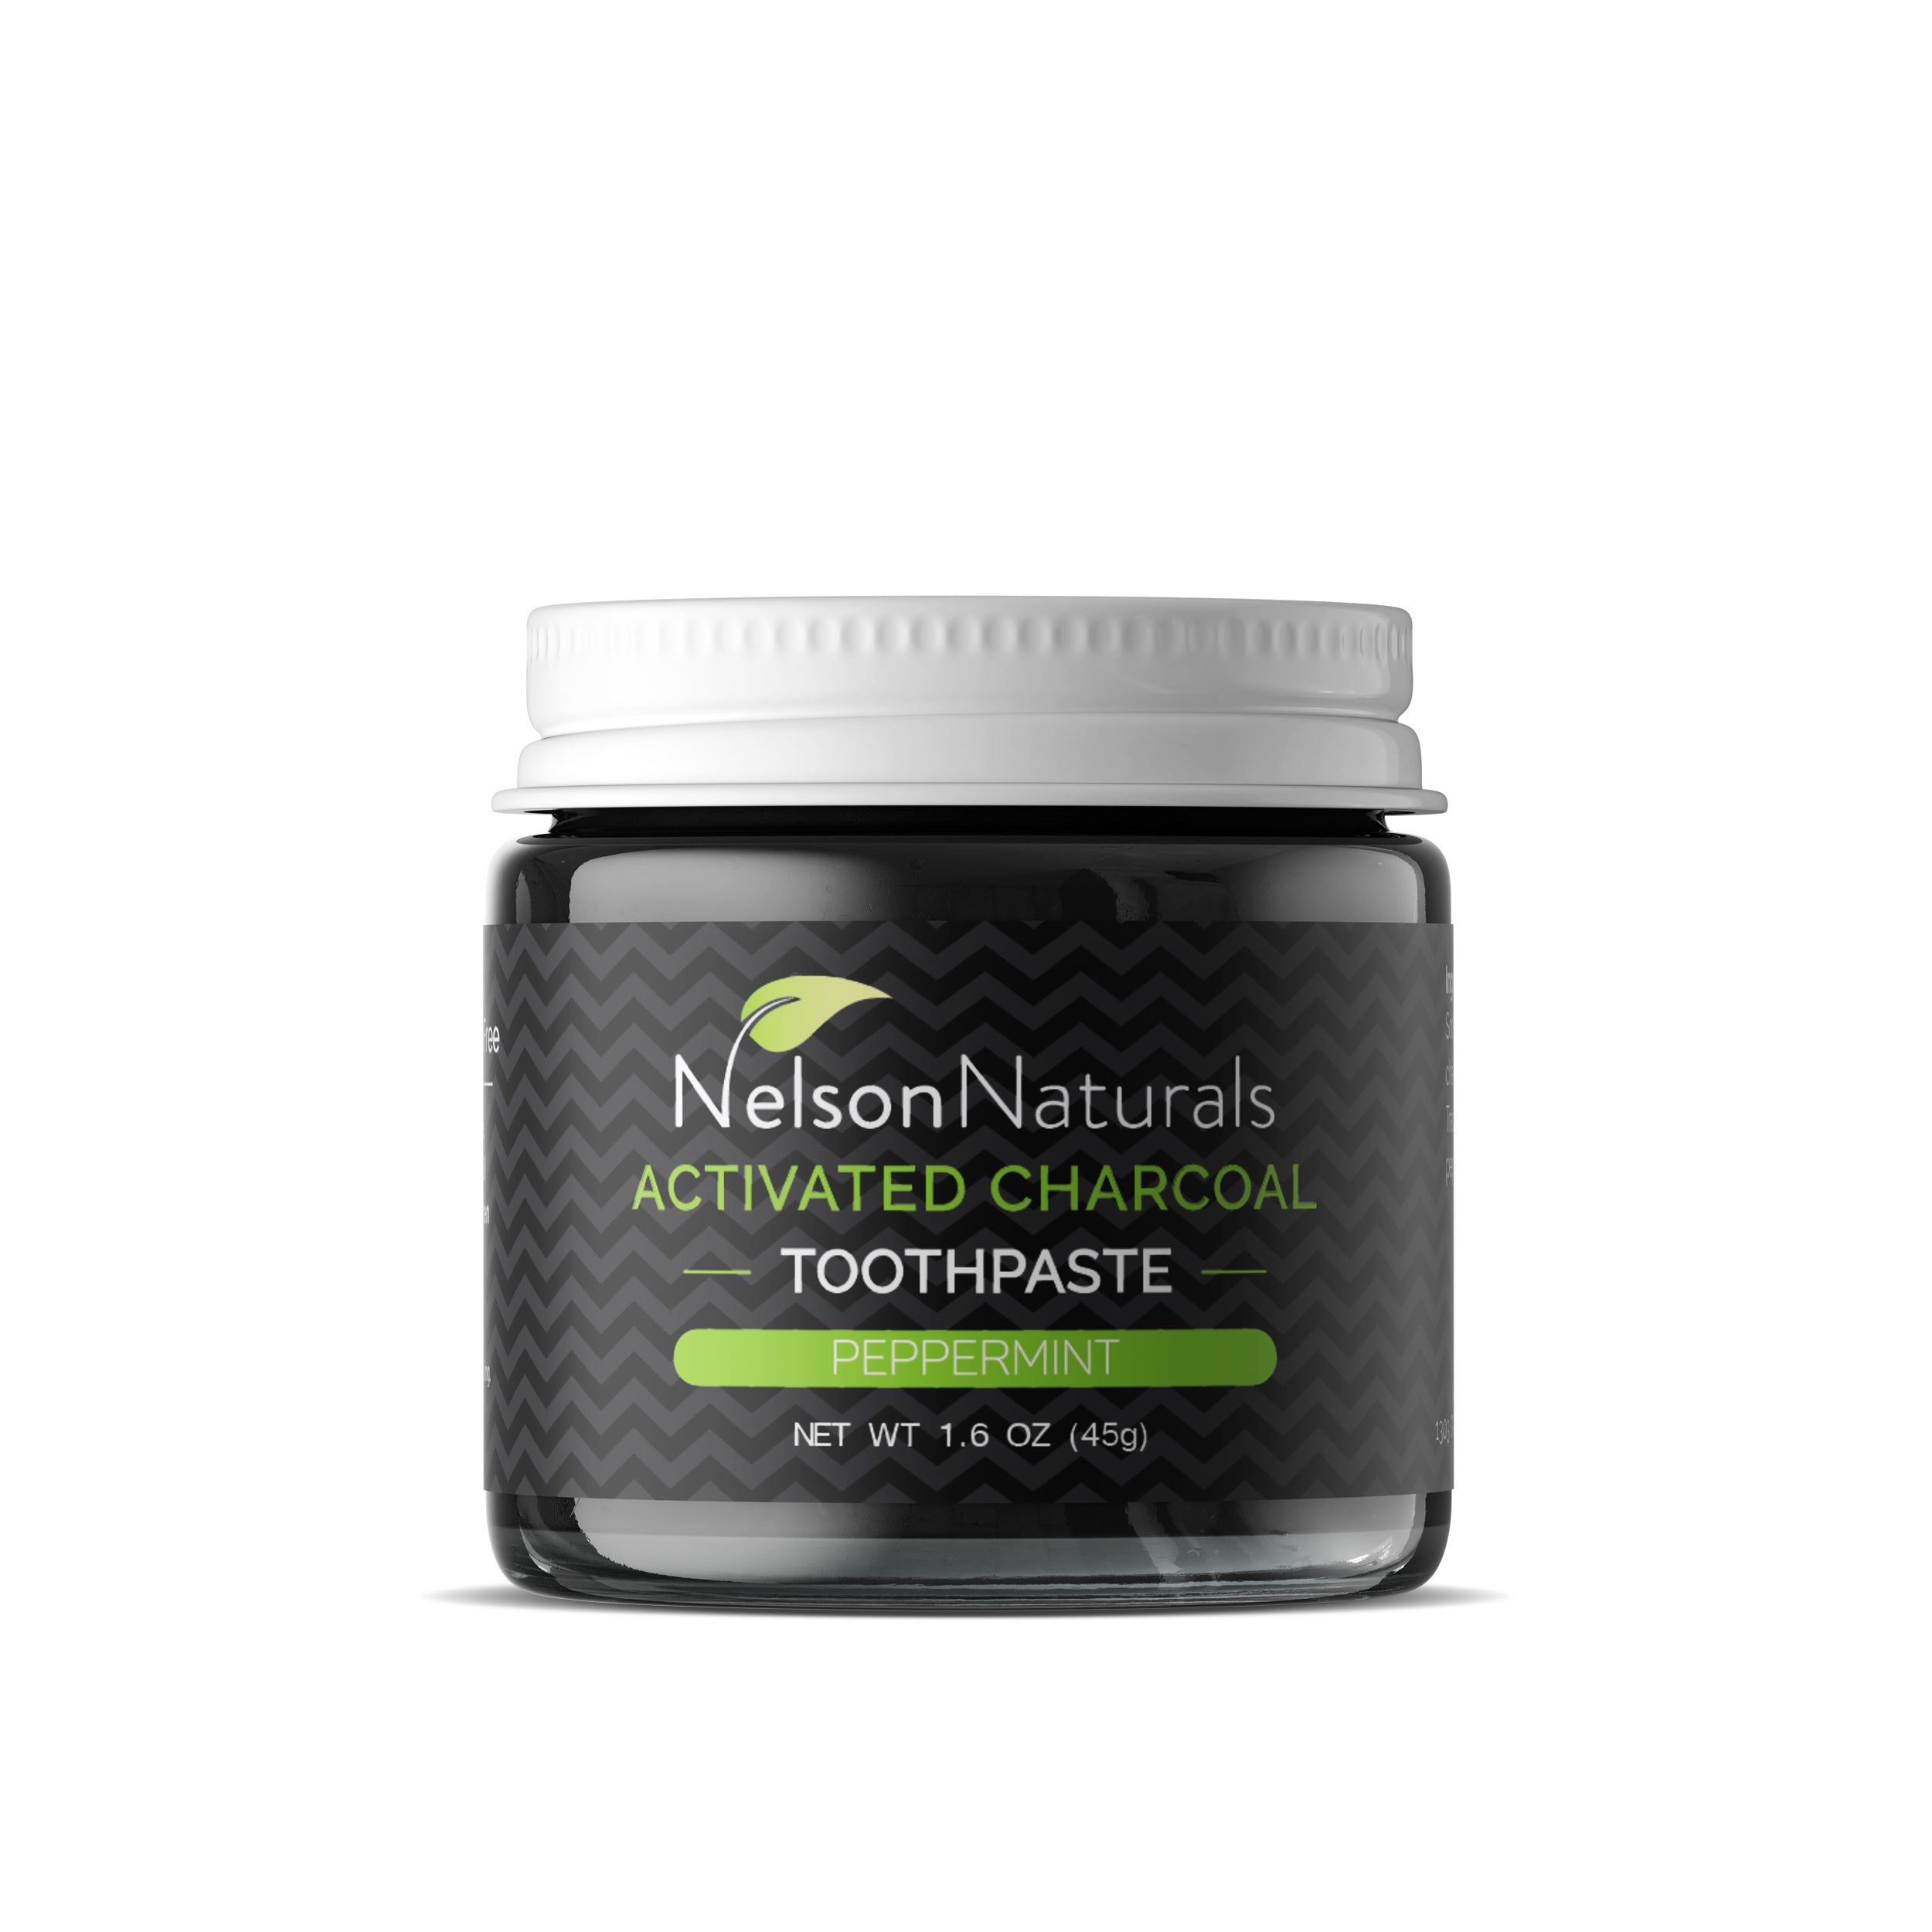 Activated Charcoal Whitening Toothpaste 45g - WHOLESALE Toothpaste - nelsonnaturals remineralizing toothpaste